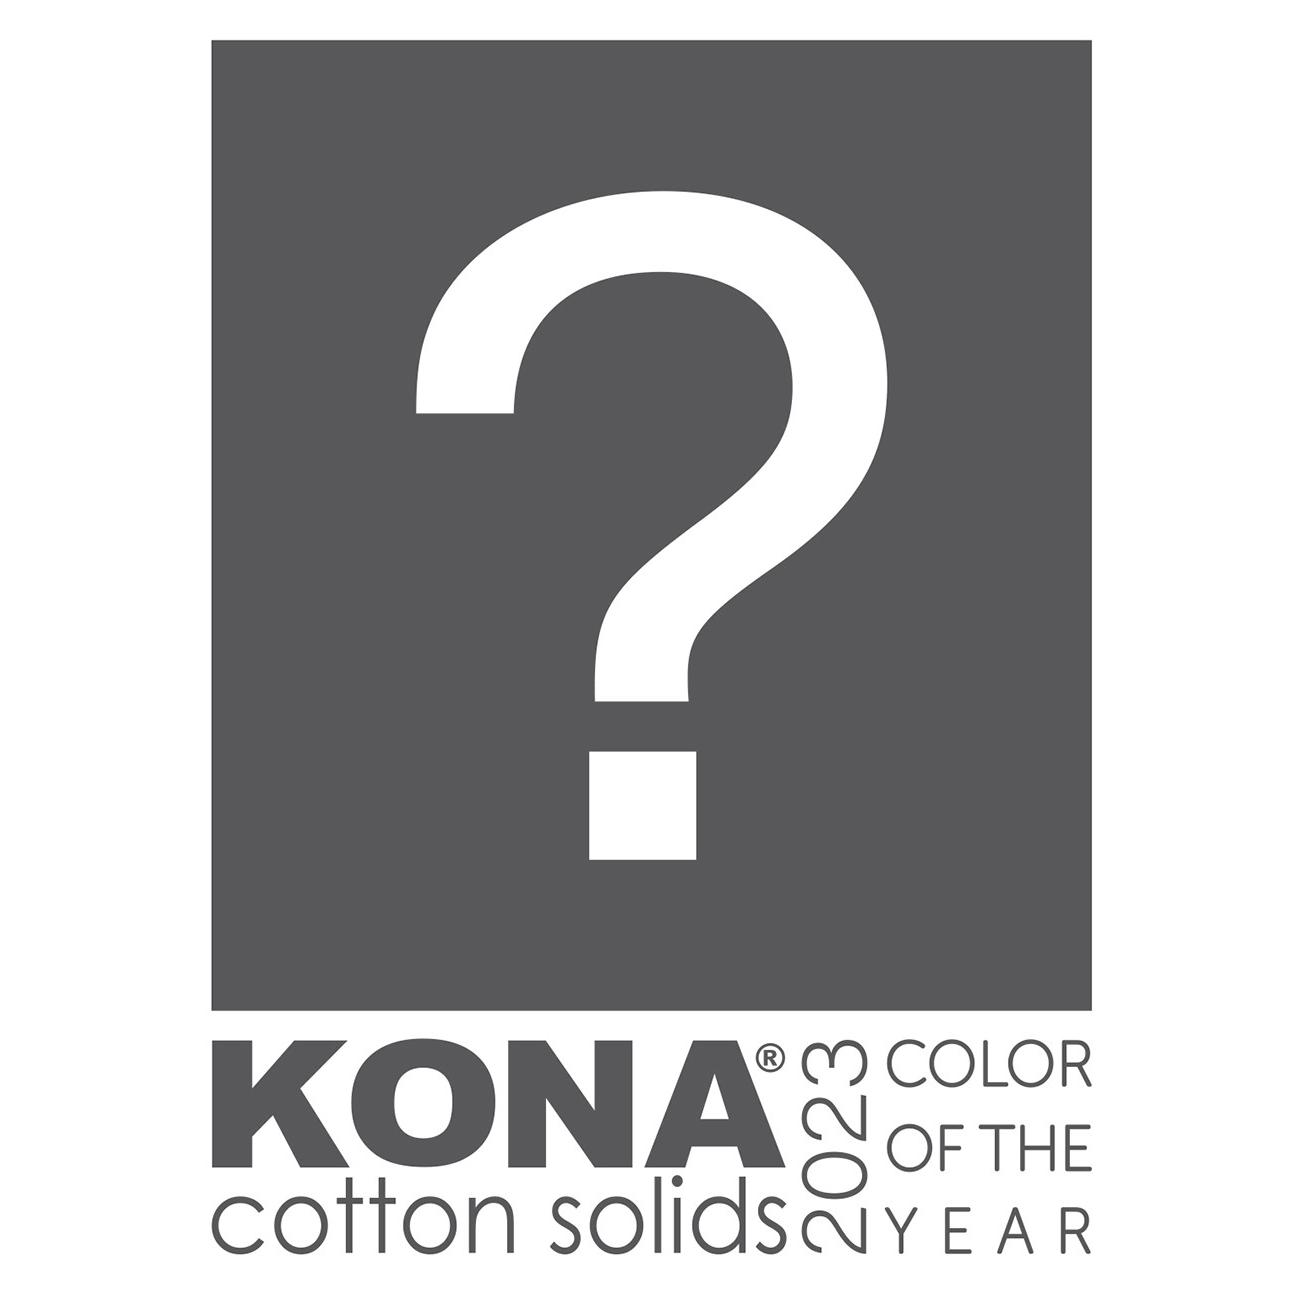 Kona Cotton Fabric by the Yard. Kona Solids Fabric: 232 Colors, by